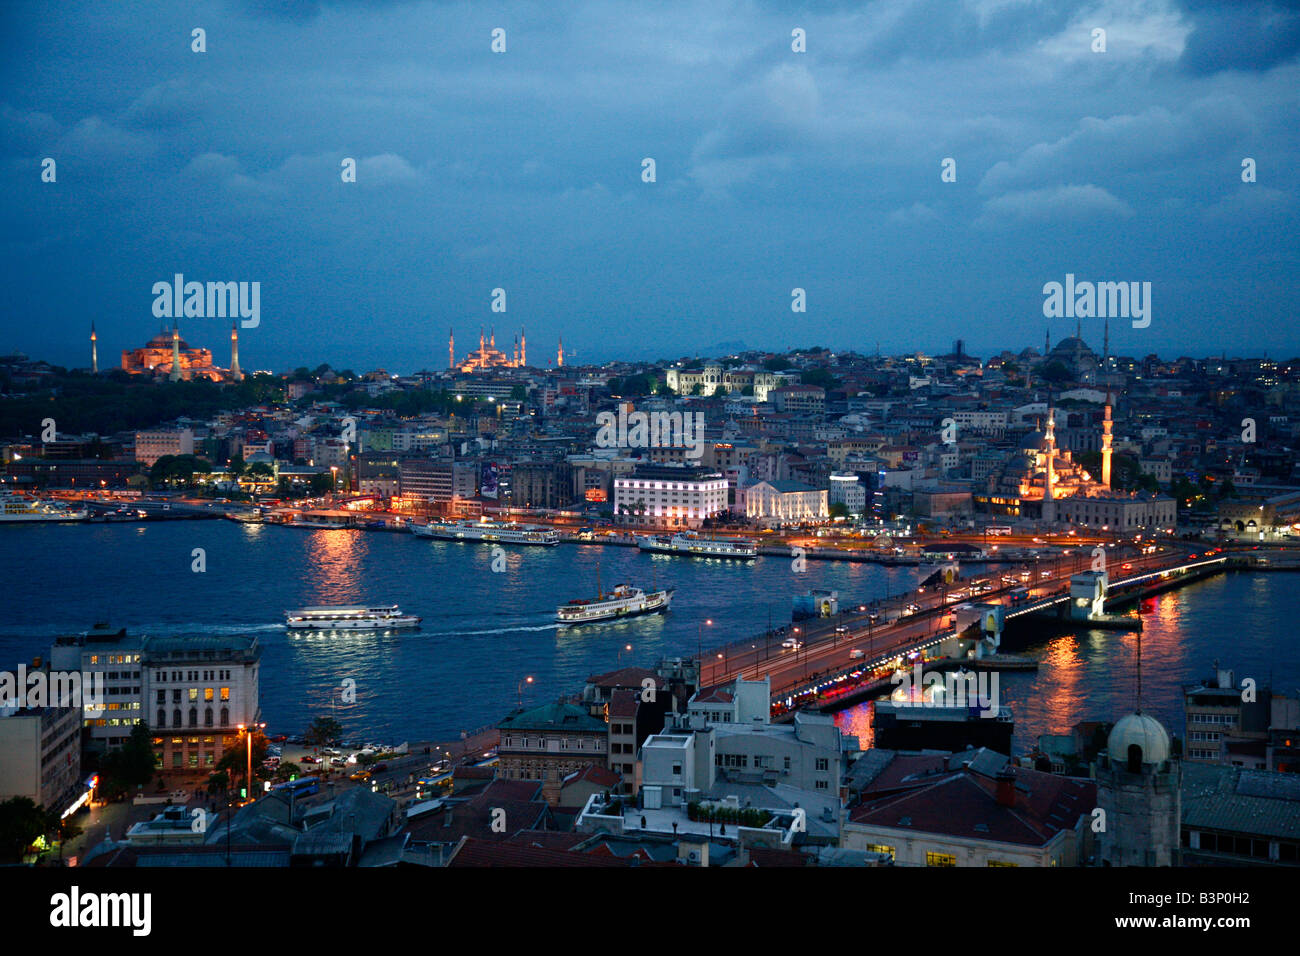 May 2008 - Skyline of Istanbul with a view over the Golden Horn and the Galata bridge Istanbul Turkey Stock Photo